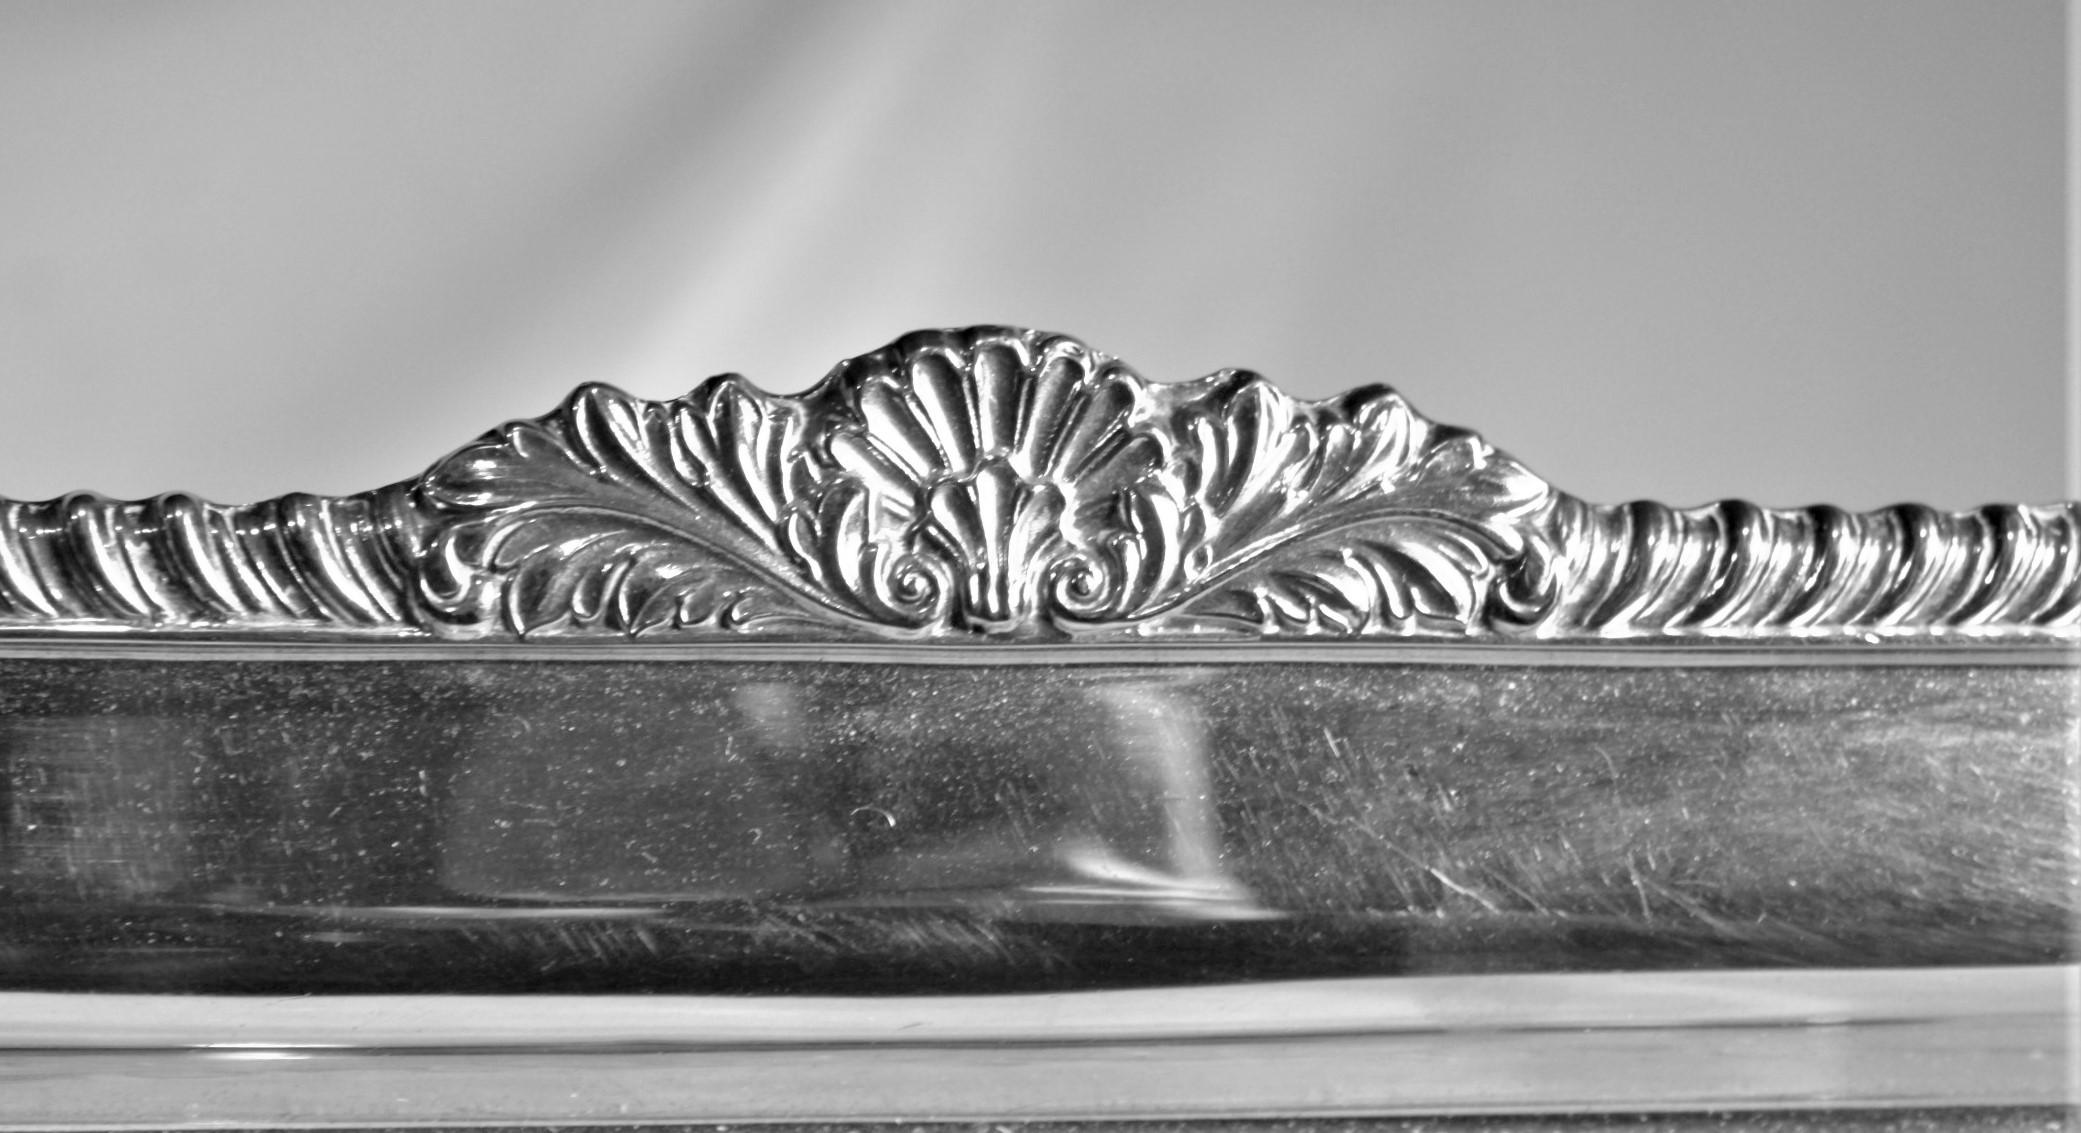 Antique Styled Silver Plated Serving Tray with Ornate Engraving & Handles 2